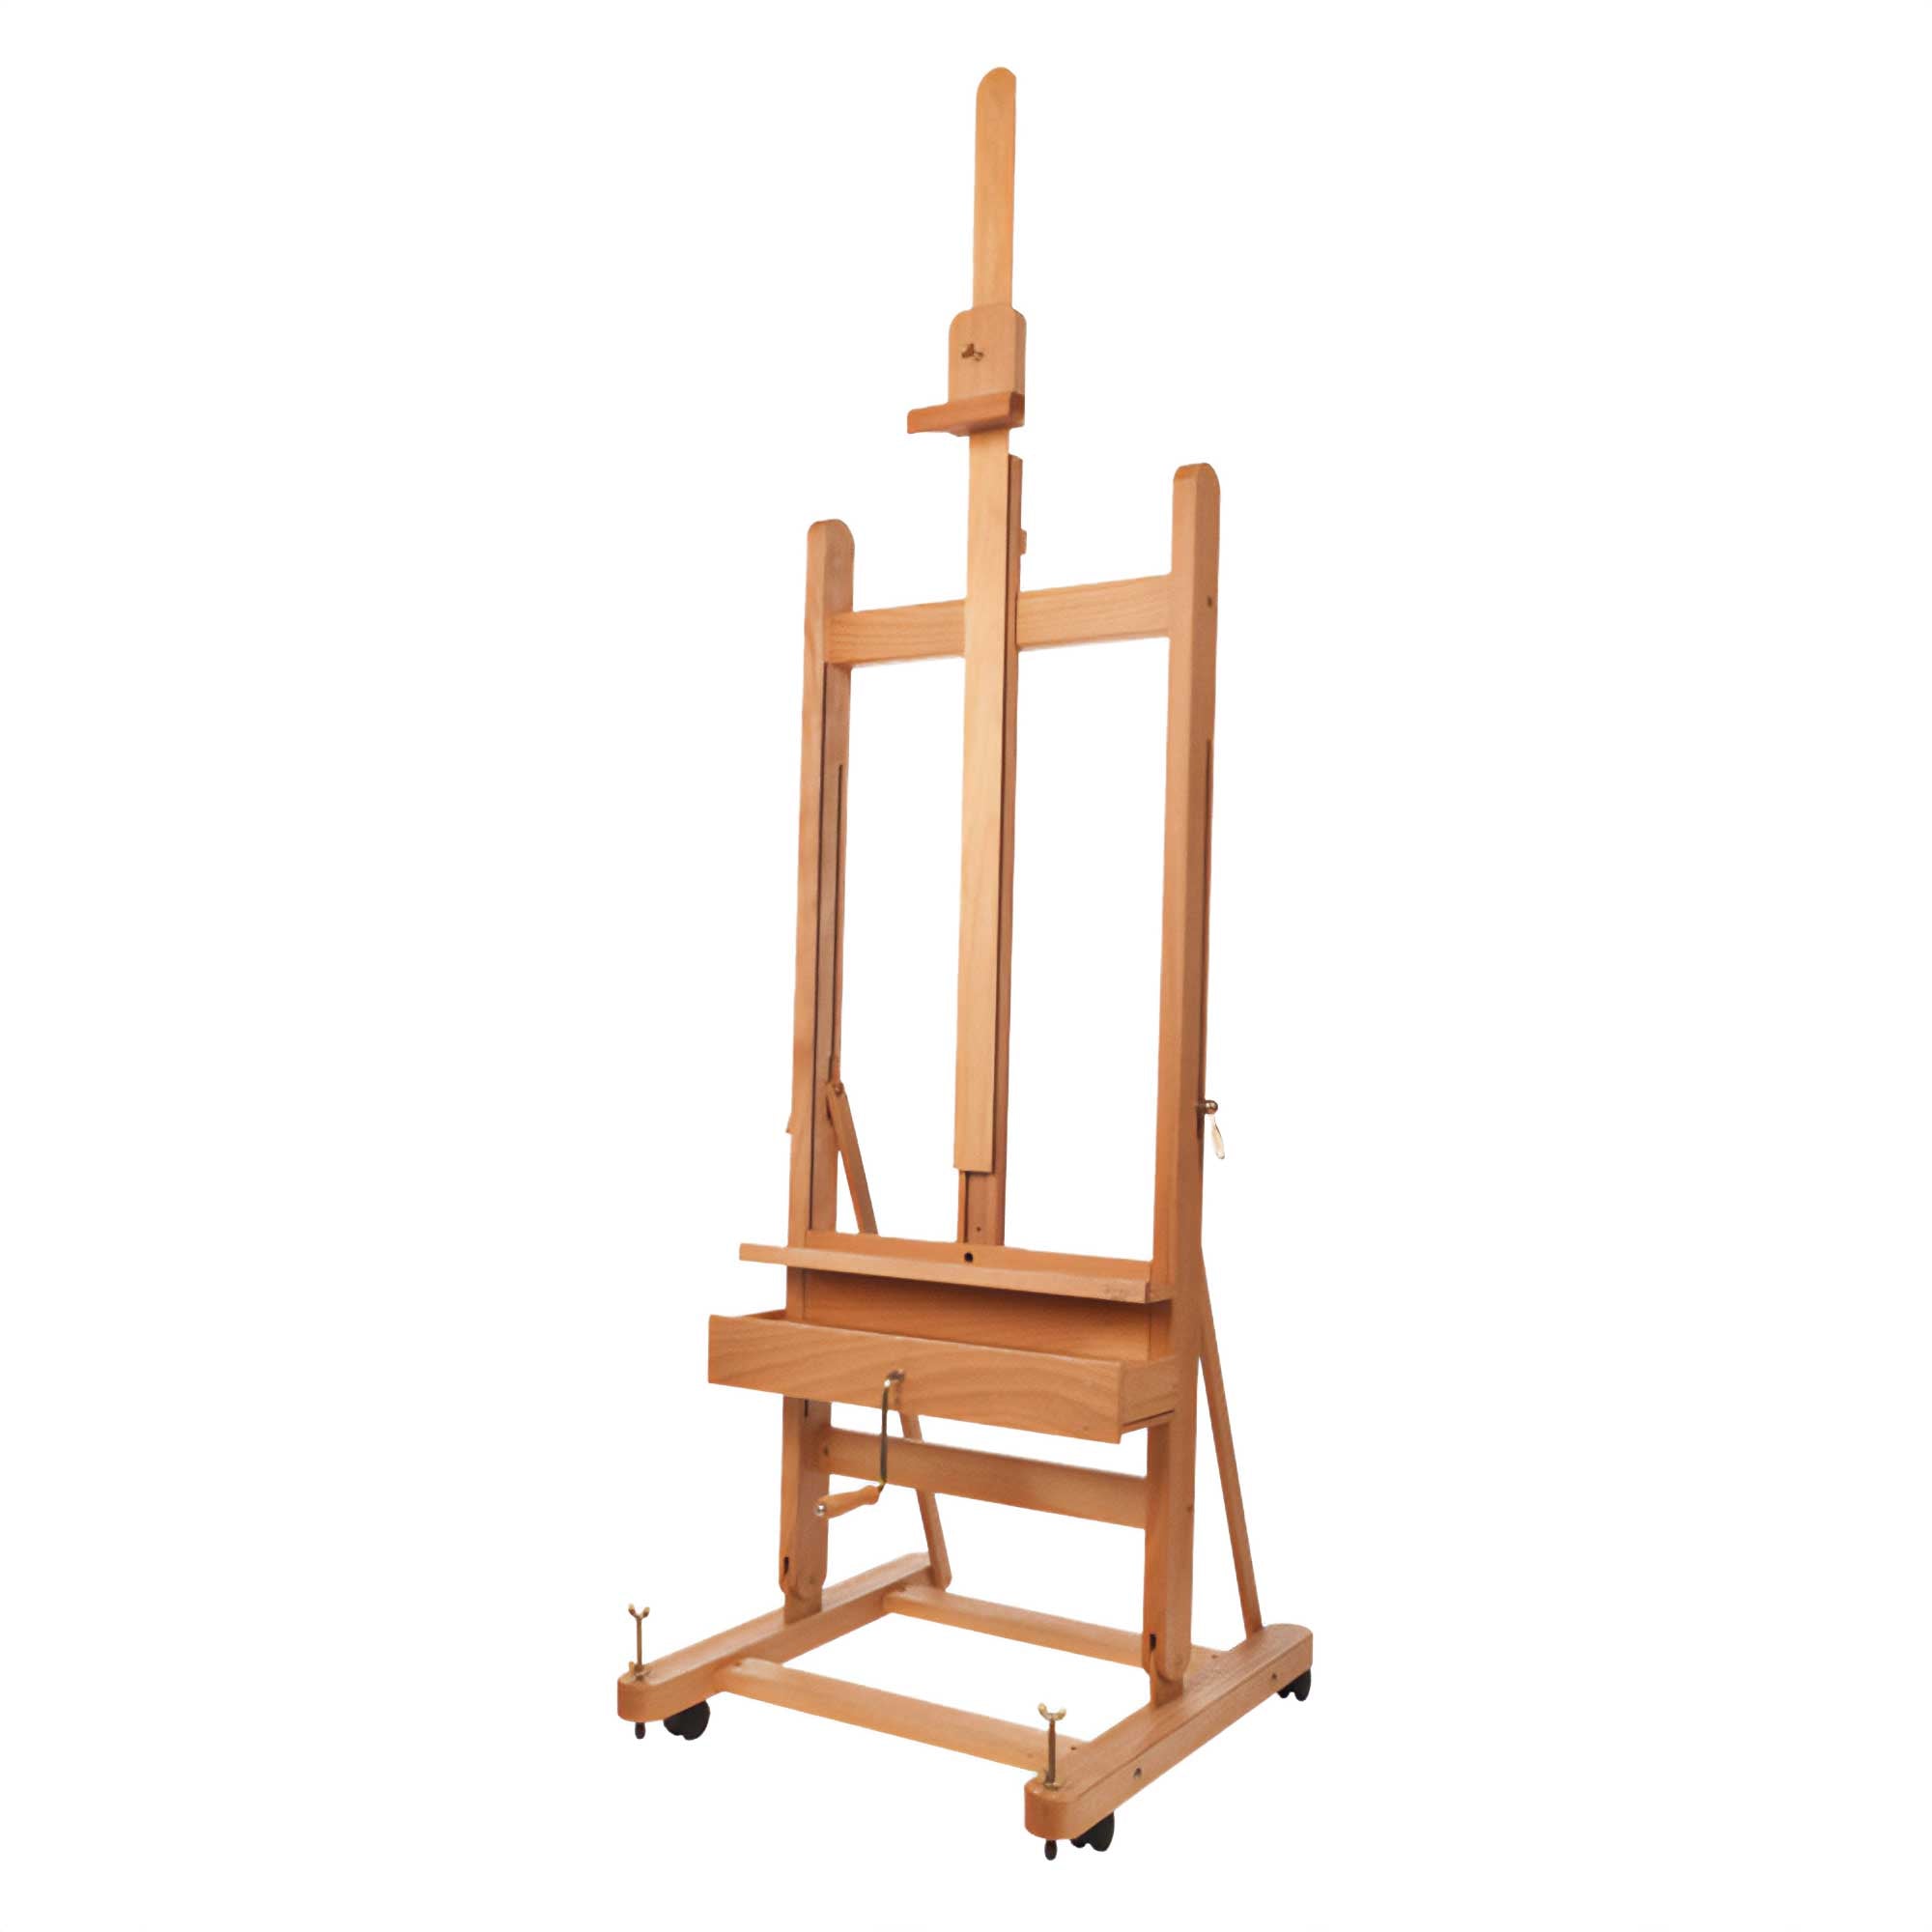  Wooden Bifold Display Easel with 2 Height-Adjustable Pegs, 65h  Floor-Standing Art Easel for Indoor Use - Cherry, Wood : Home & Kitchen